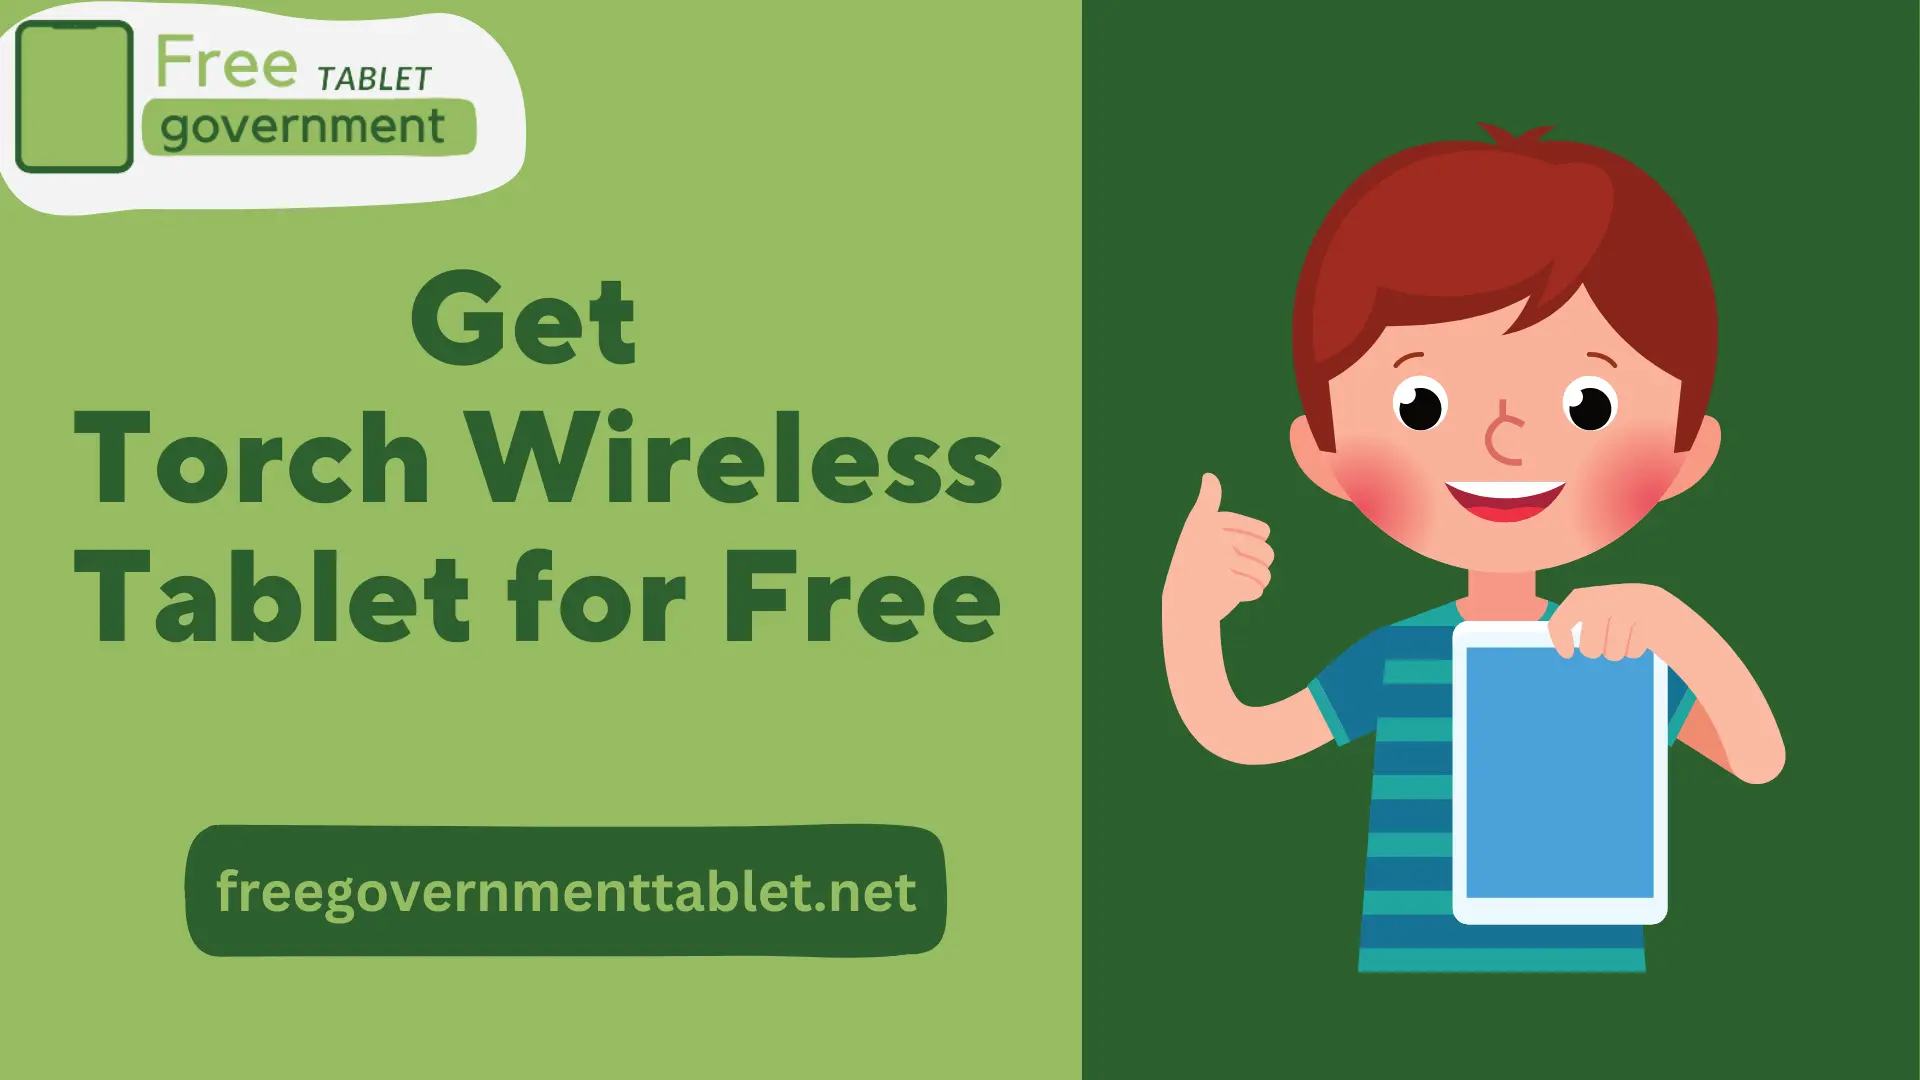 How to Get Torch Wireless Free Tablet